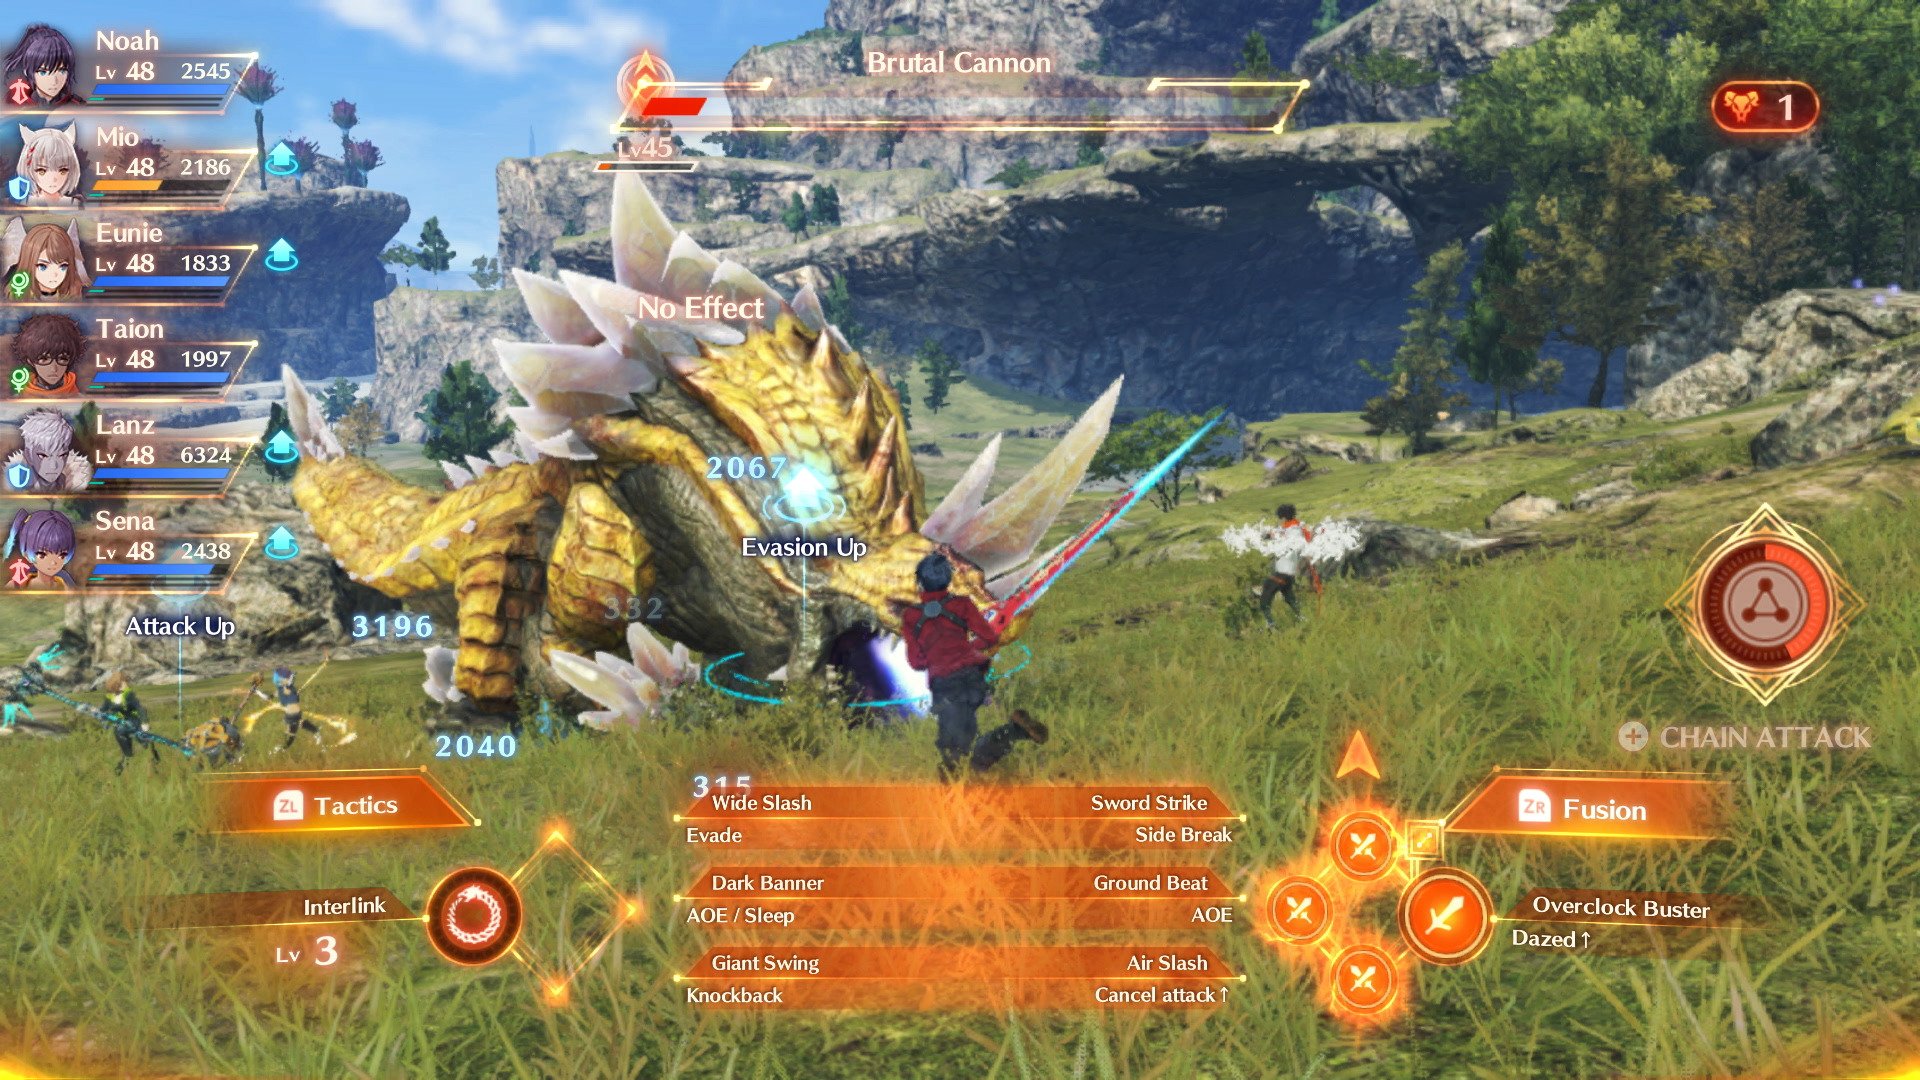 Xenoblade Chronicles 3' Review: The Mysterious World Of Aionios Beckons